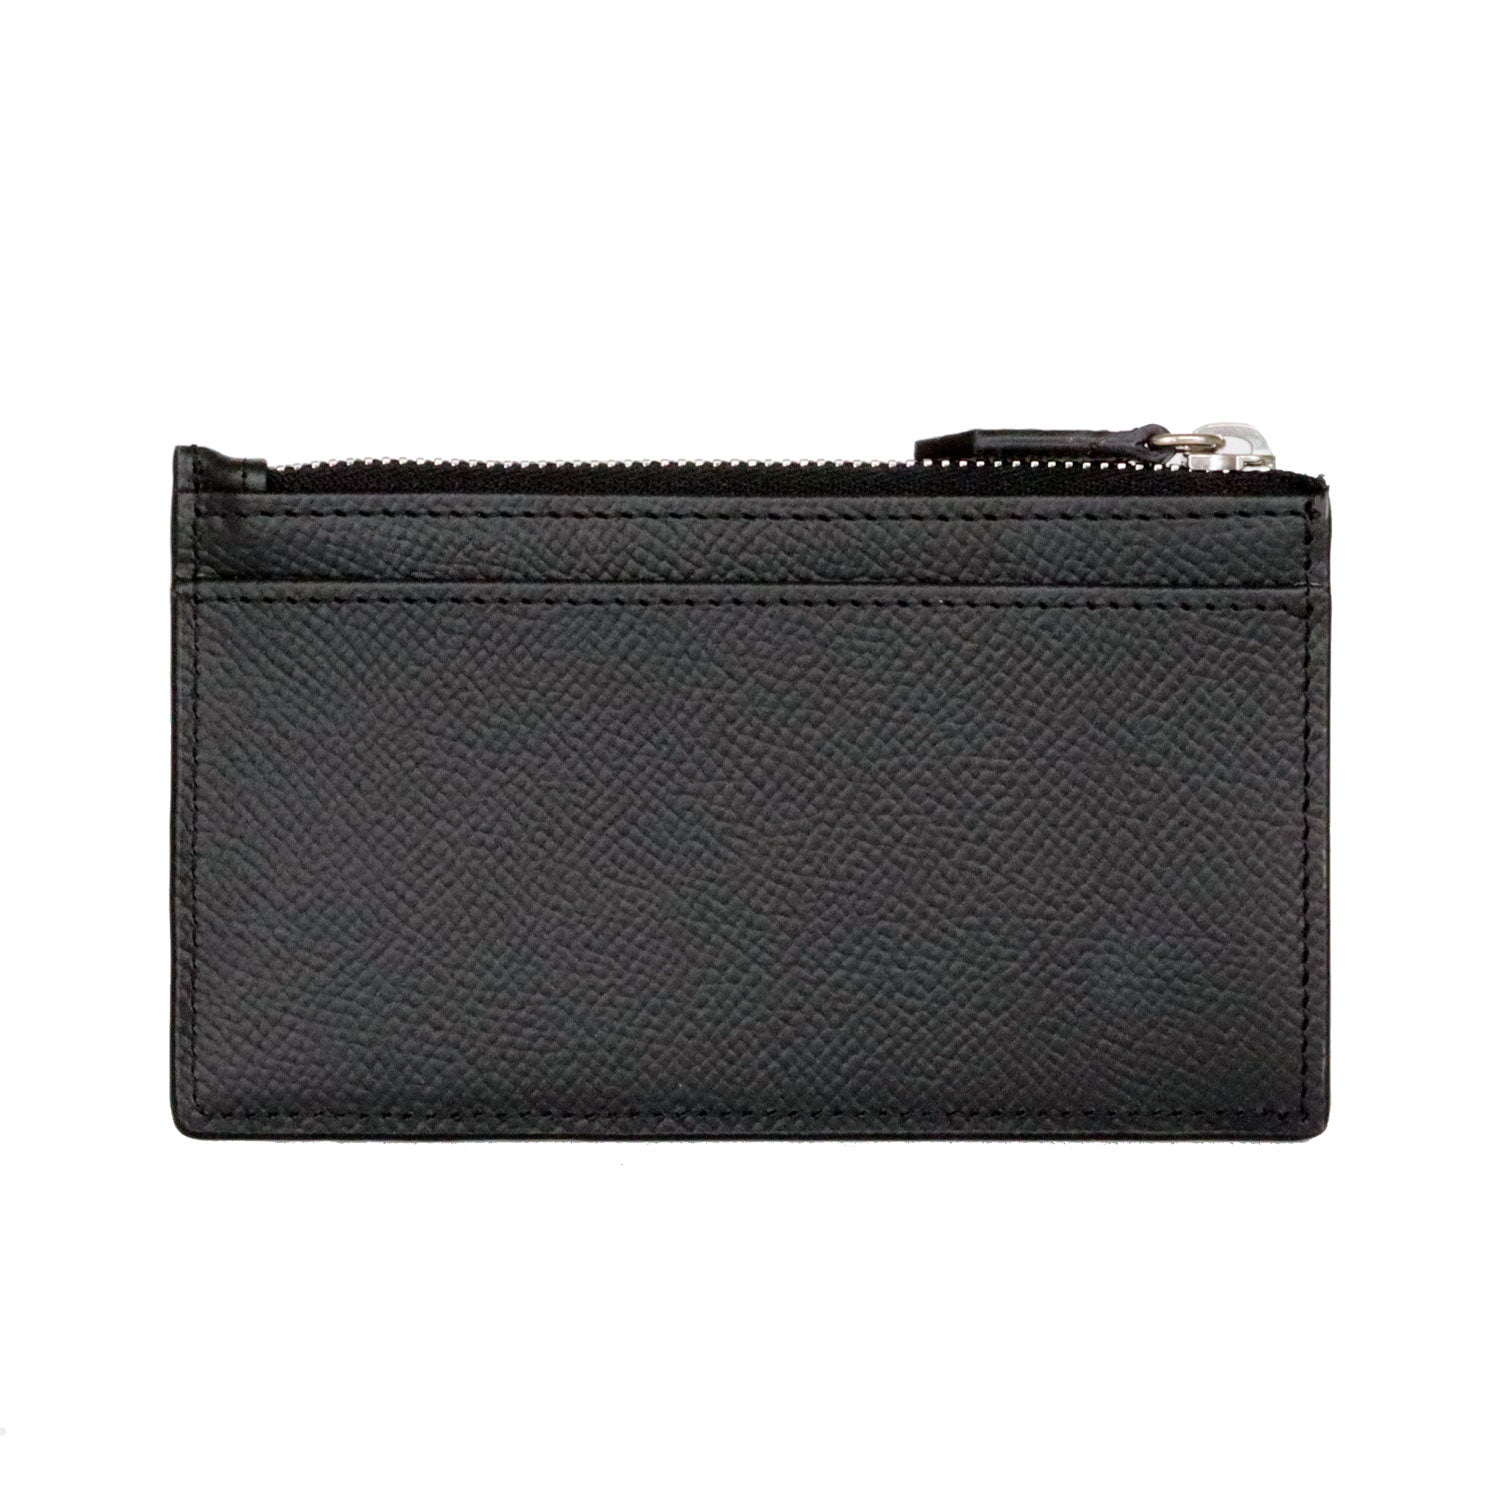 Mini zip wallet in Noblesse leather